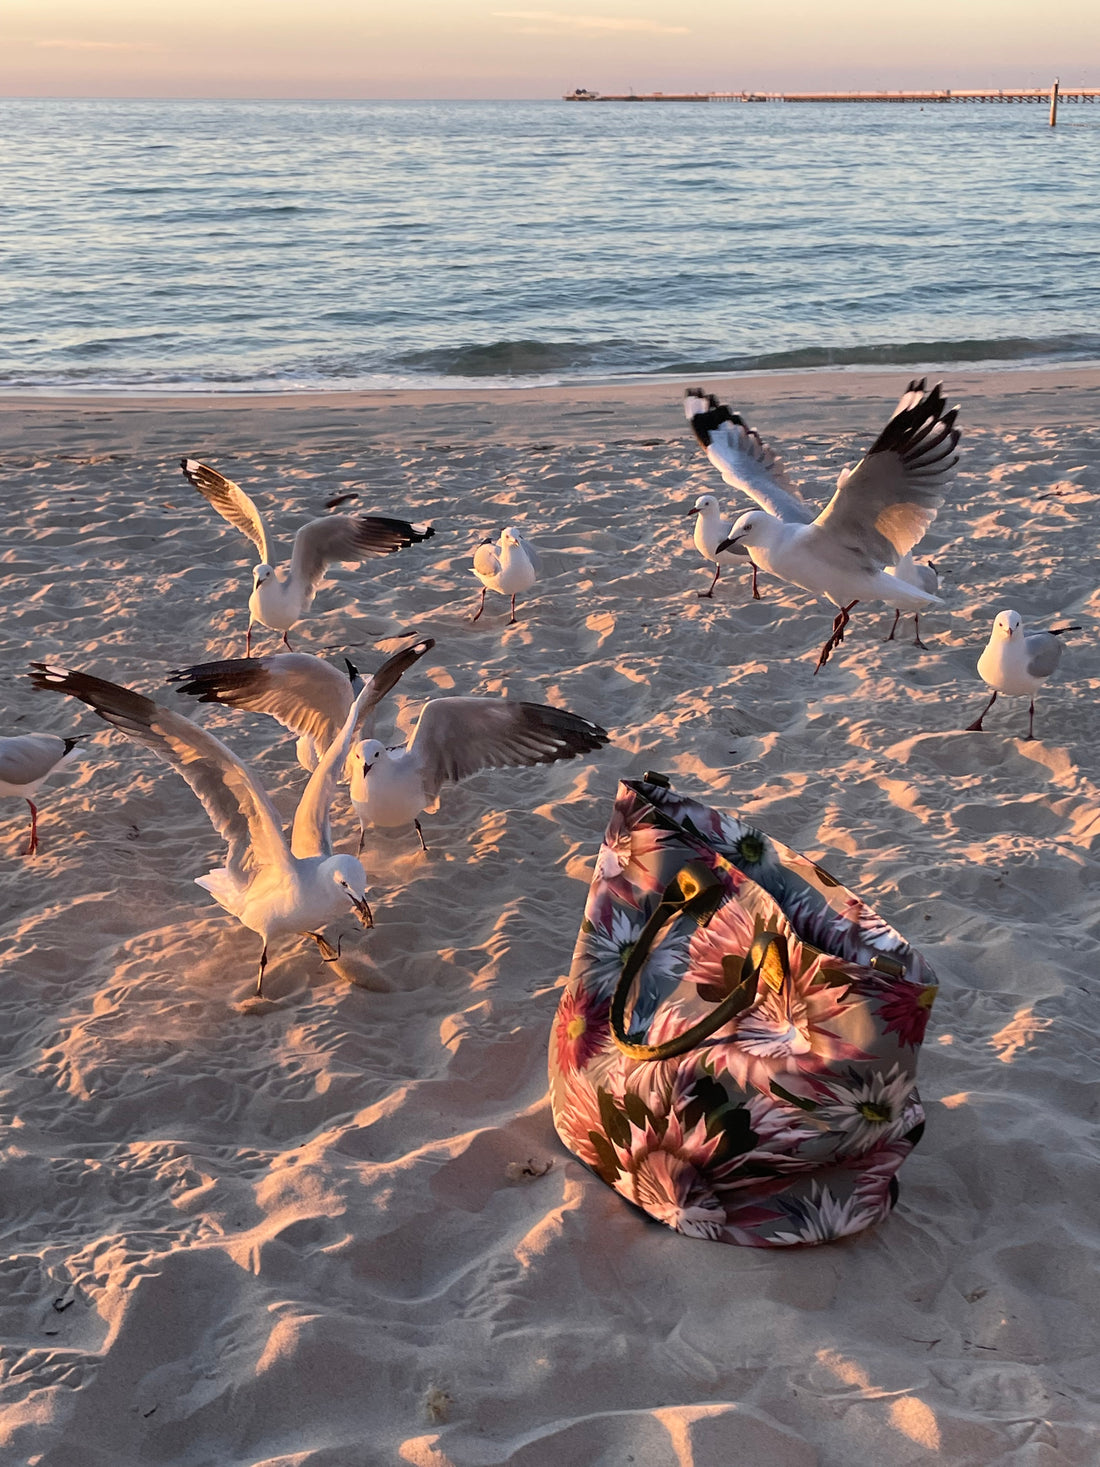 large water resistant, wildflower, canvas tote bag on the beach surrounded by flying seagulls. It is evening time and the sea is calm and the sand is full of footprints.